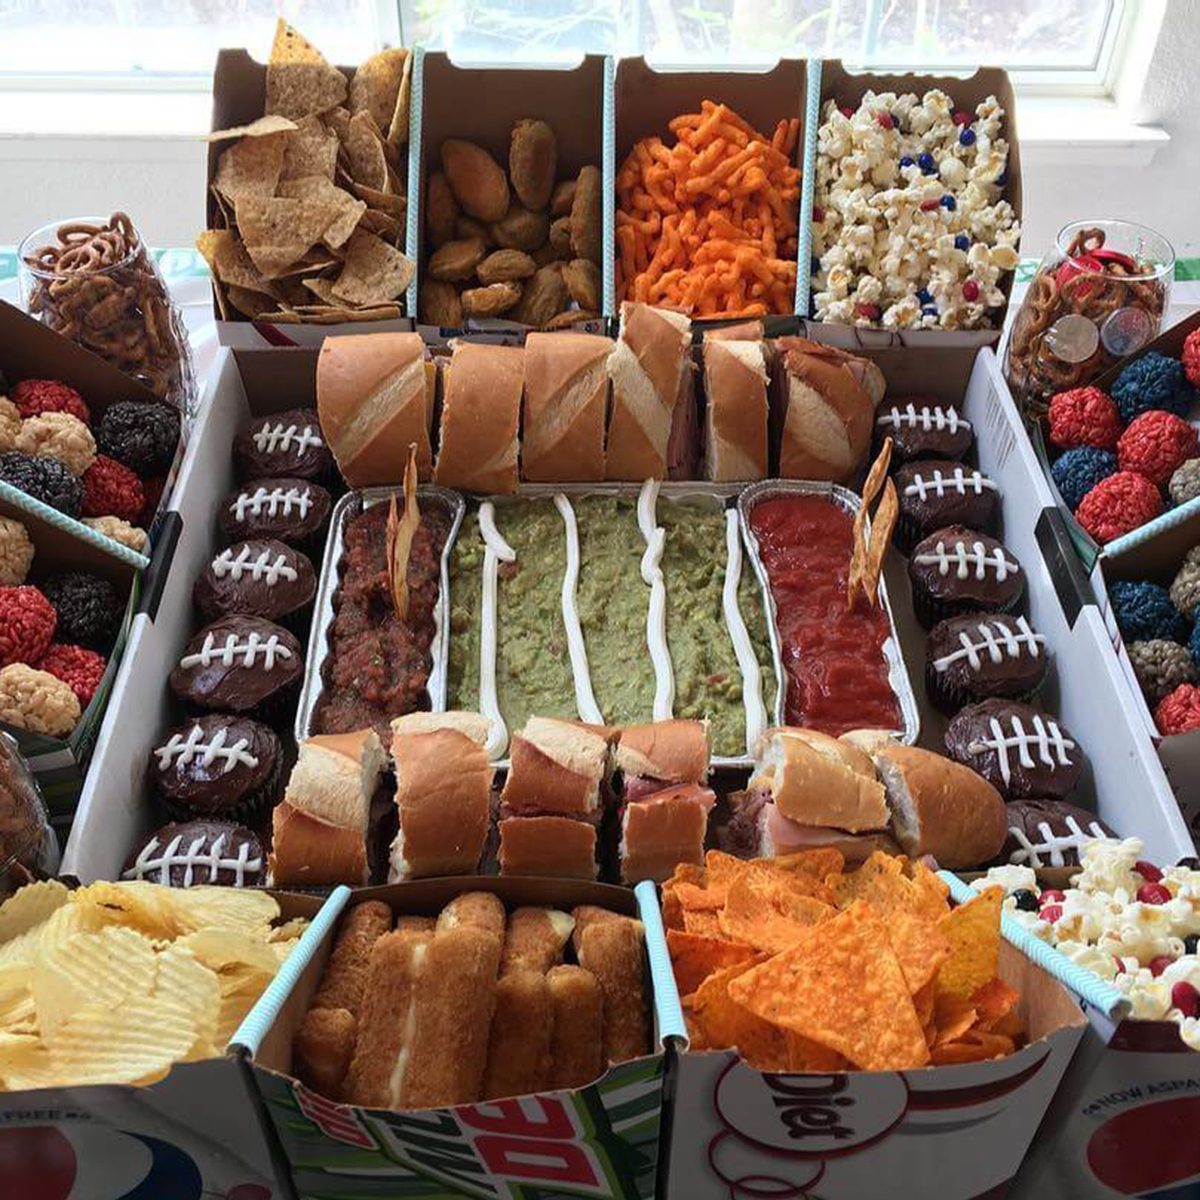 7 Amazing Snack Stadiums for the Super Bowl | Taste of Home